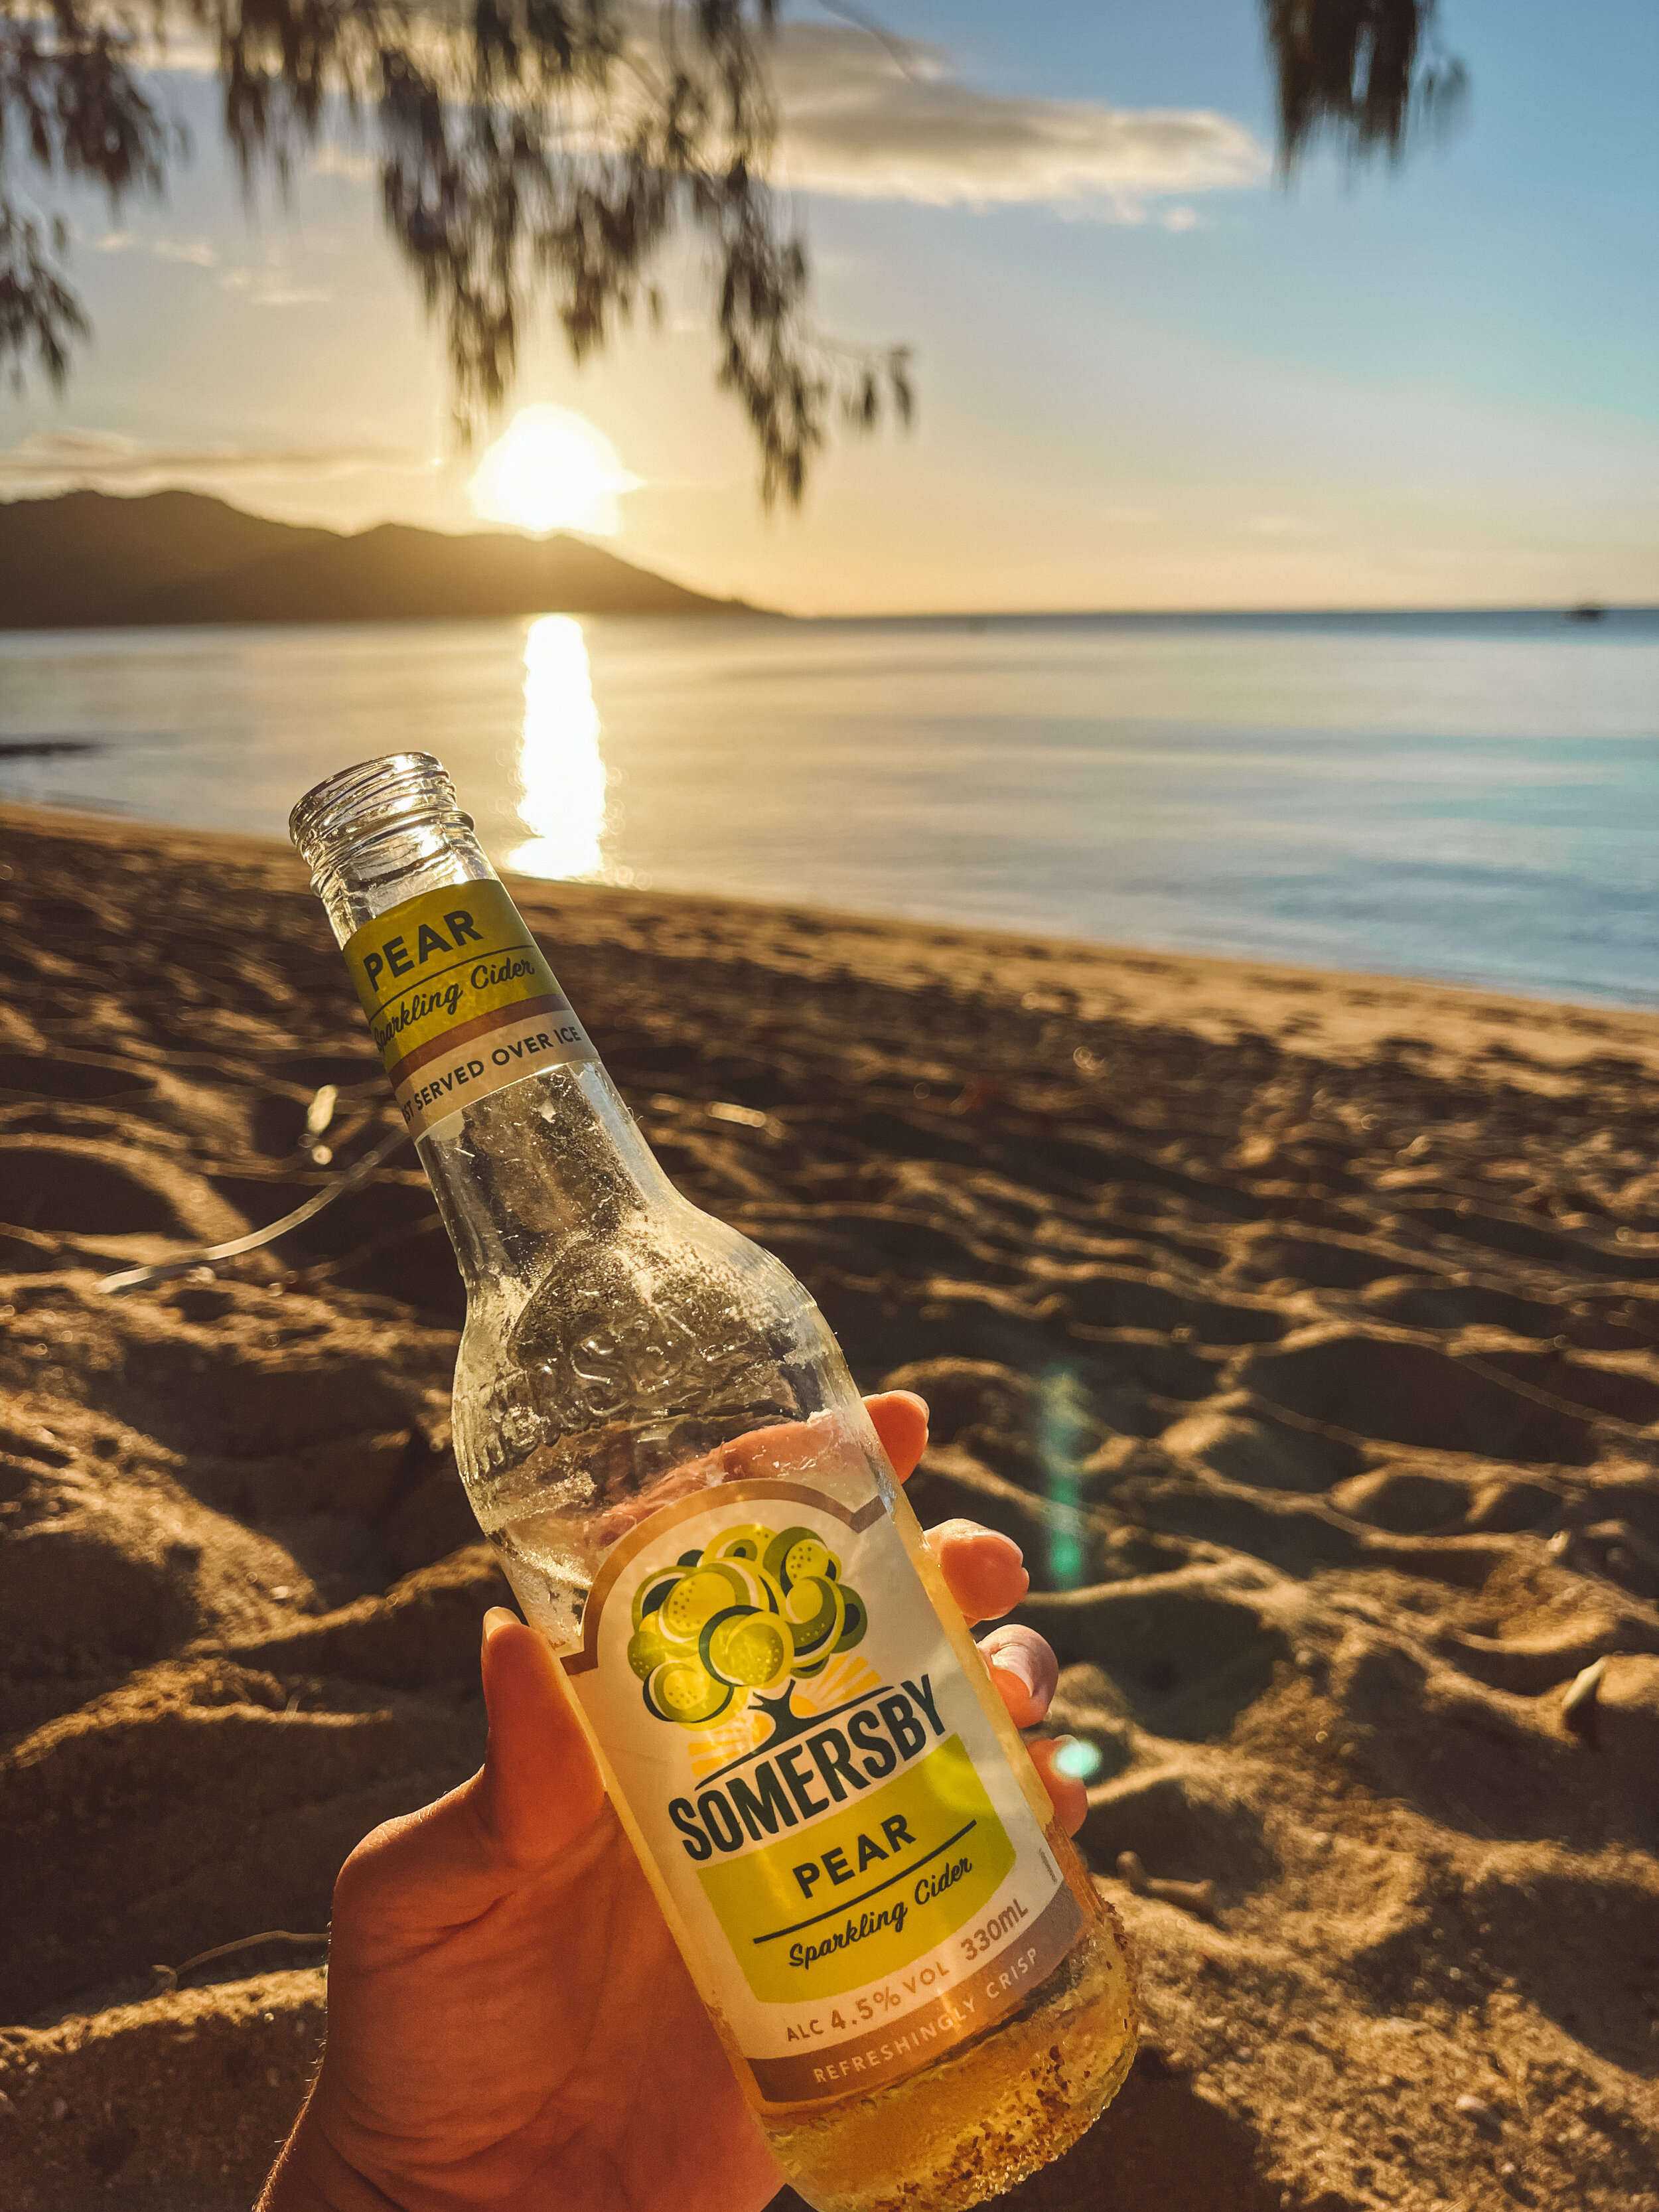 Pear Cider at Sunset - Horseshoe Bay - Magnetic Island (Maggie) - Townsville - Tropical North Queensland (QLD) - Australia